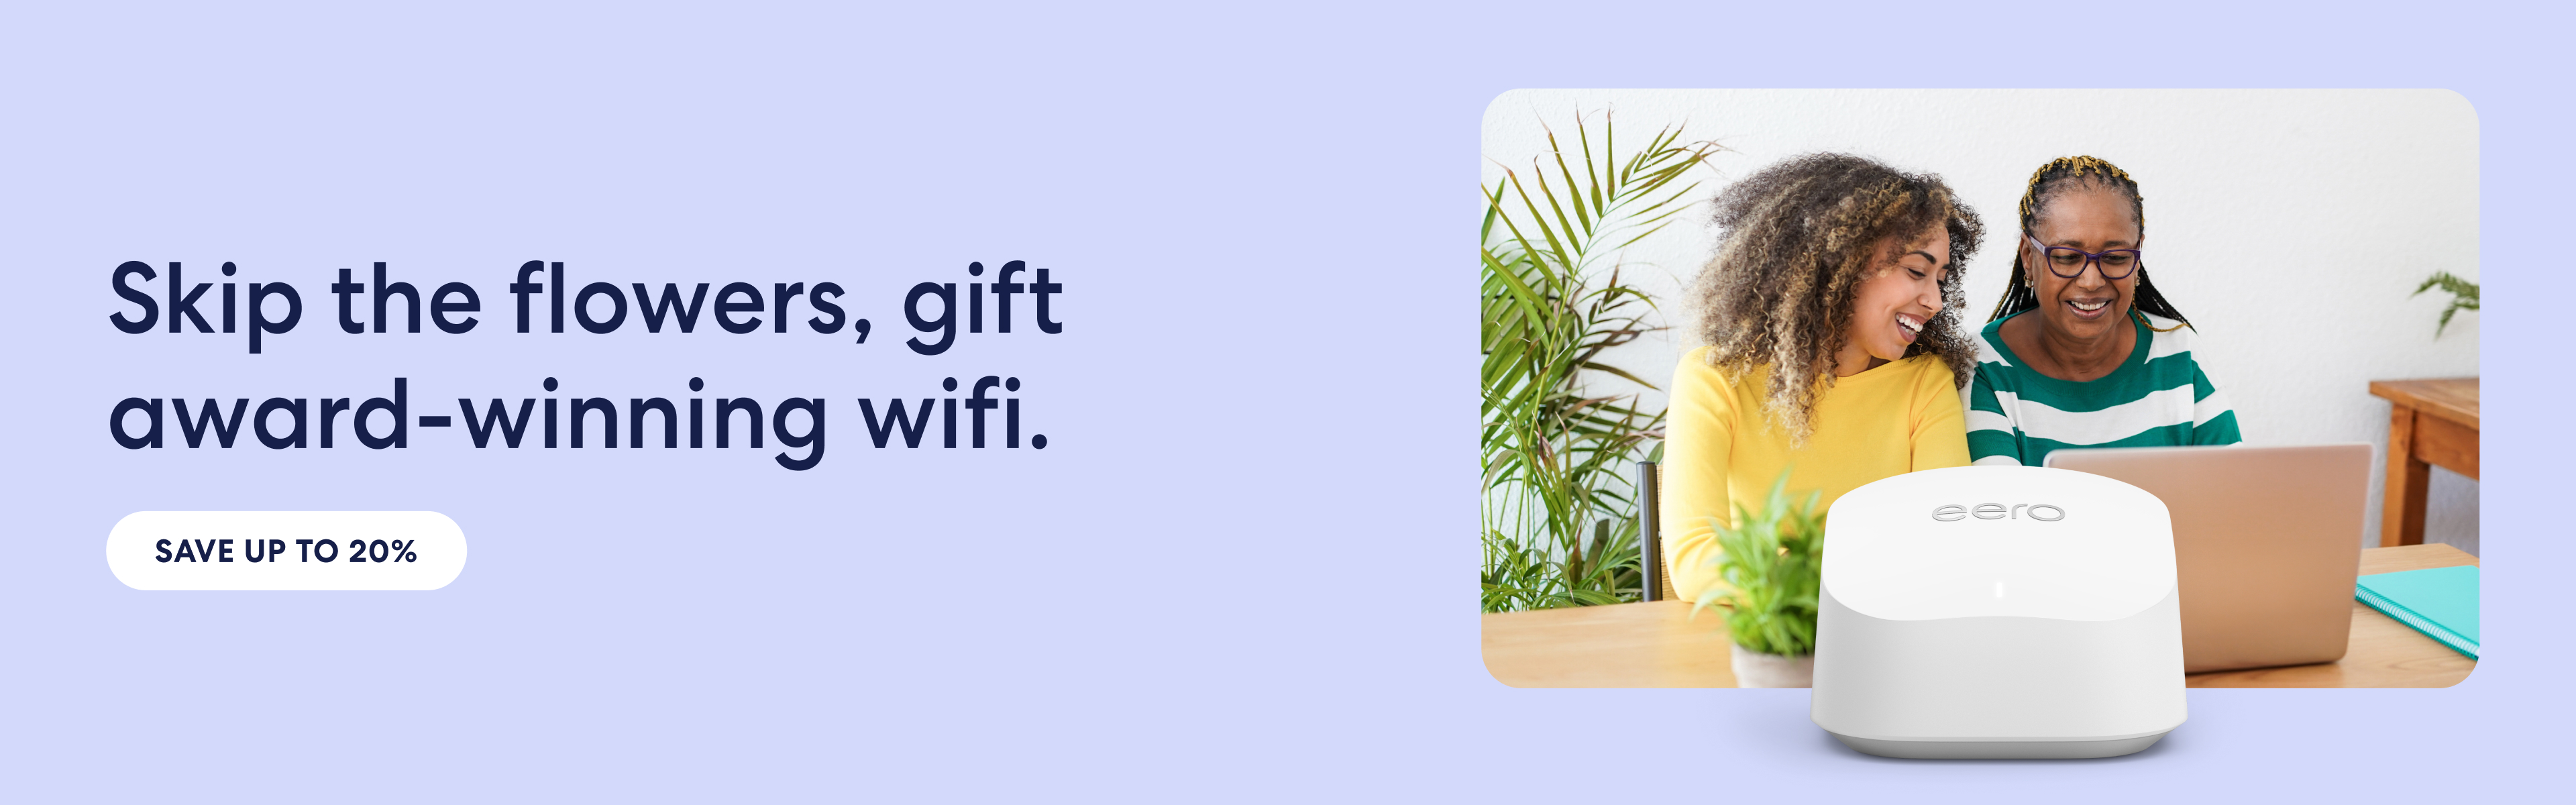 This Mother's Day, skip the flowers, gift award-winning eero wifi. Save 20% now.